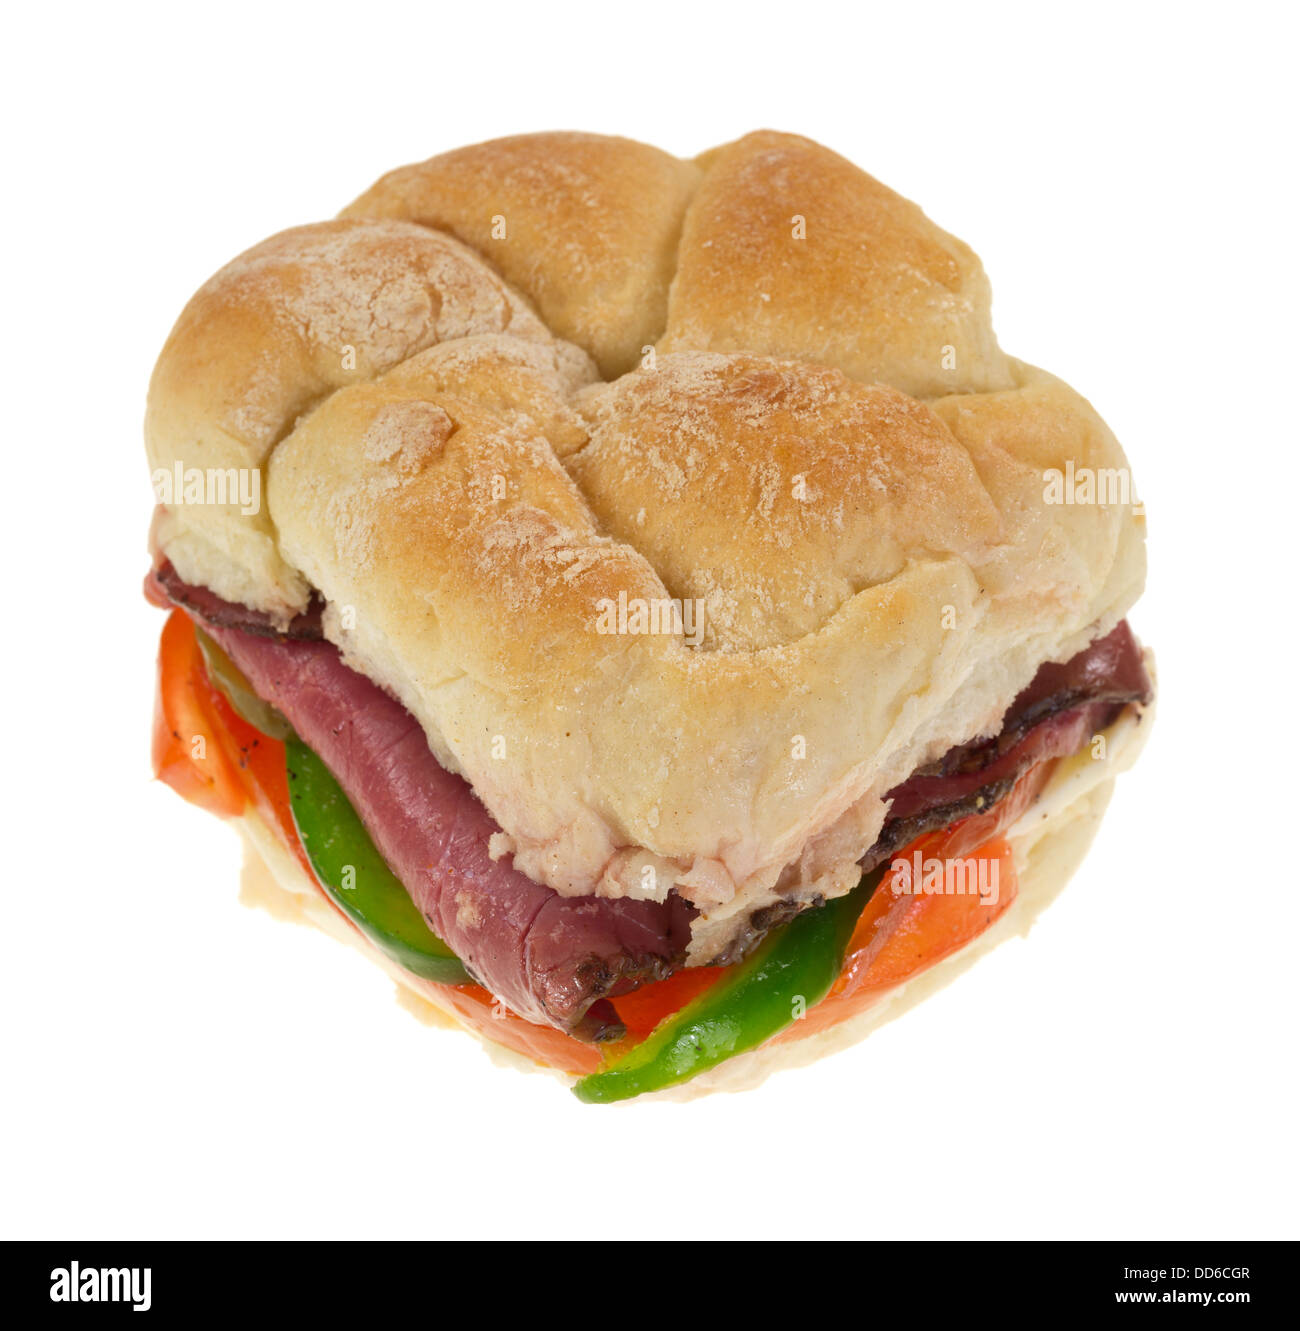 A bulky roll sandwich with roast beef and vegetables on a white background. Stock Photo